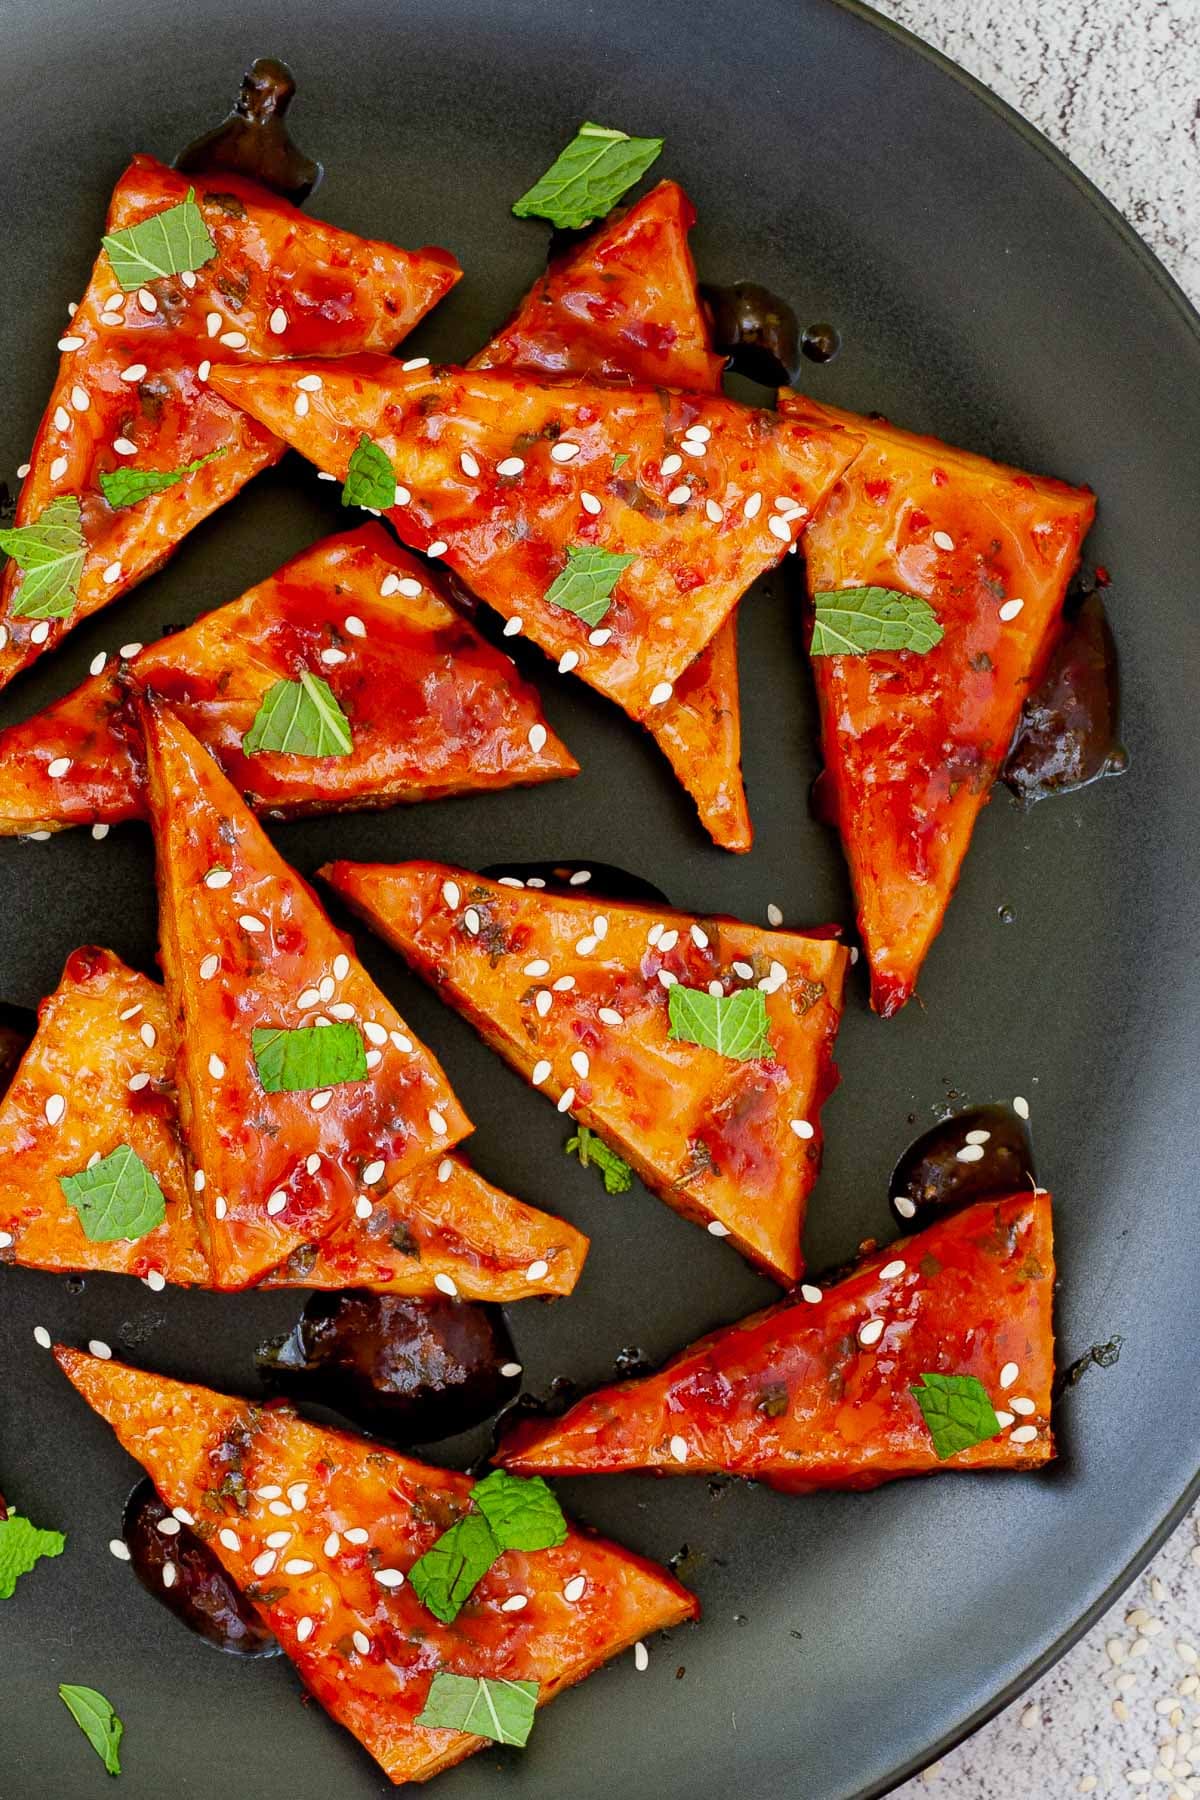 Triangle-shaped tofu slices in a red sticky glaze with freshly chopped green mint, sesame seeds on black plate